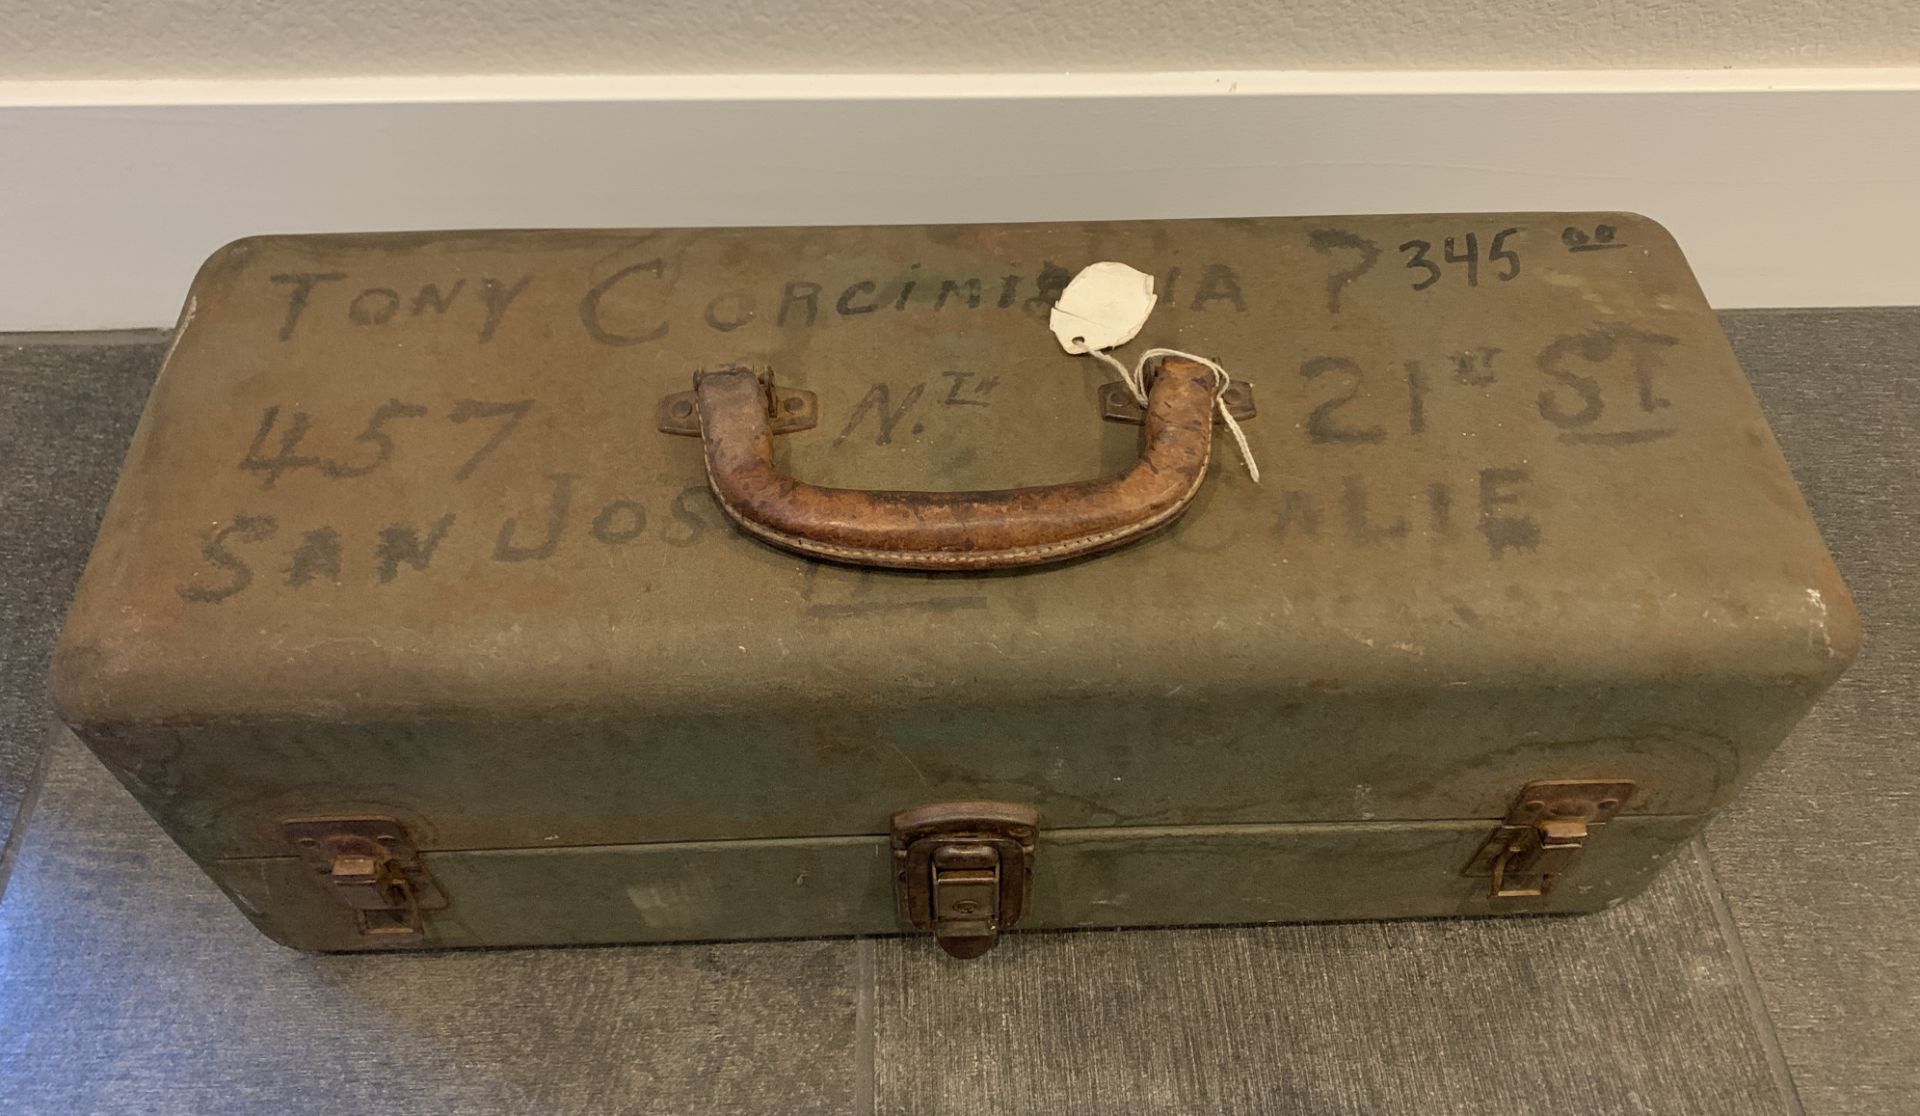 VINTAGE FISHERMAN'S TACKLE BOX WITH FISHING ITEMS INSIDE $350 VALUE LEATHER HANDLE ON CASE - Image 2 of 11